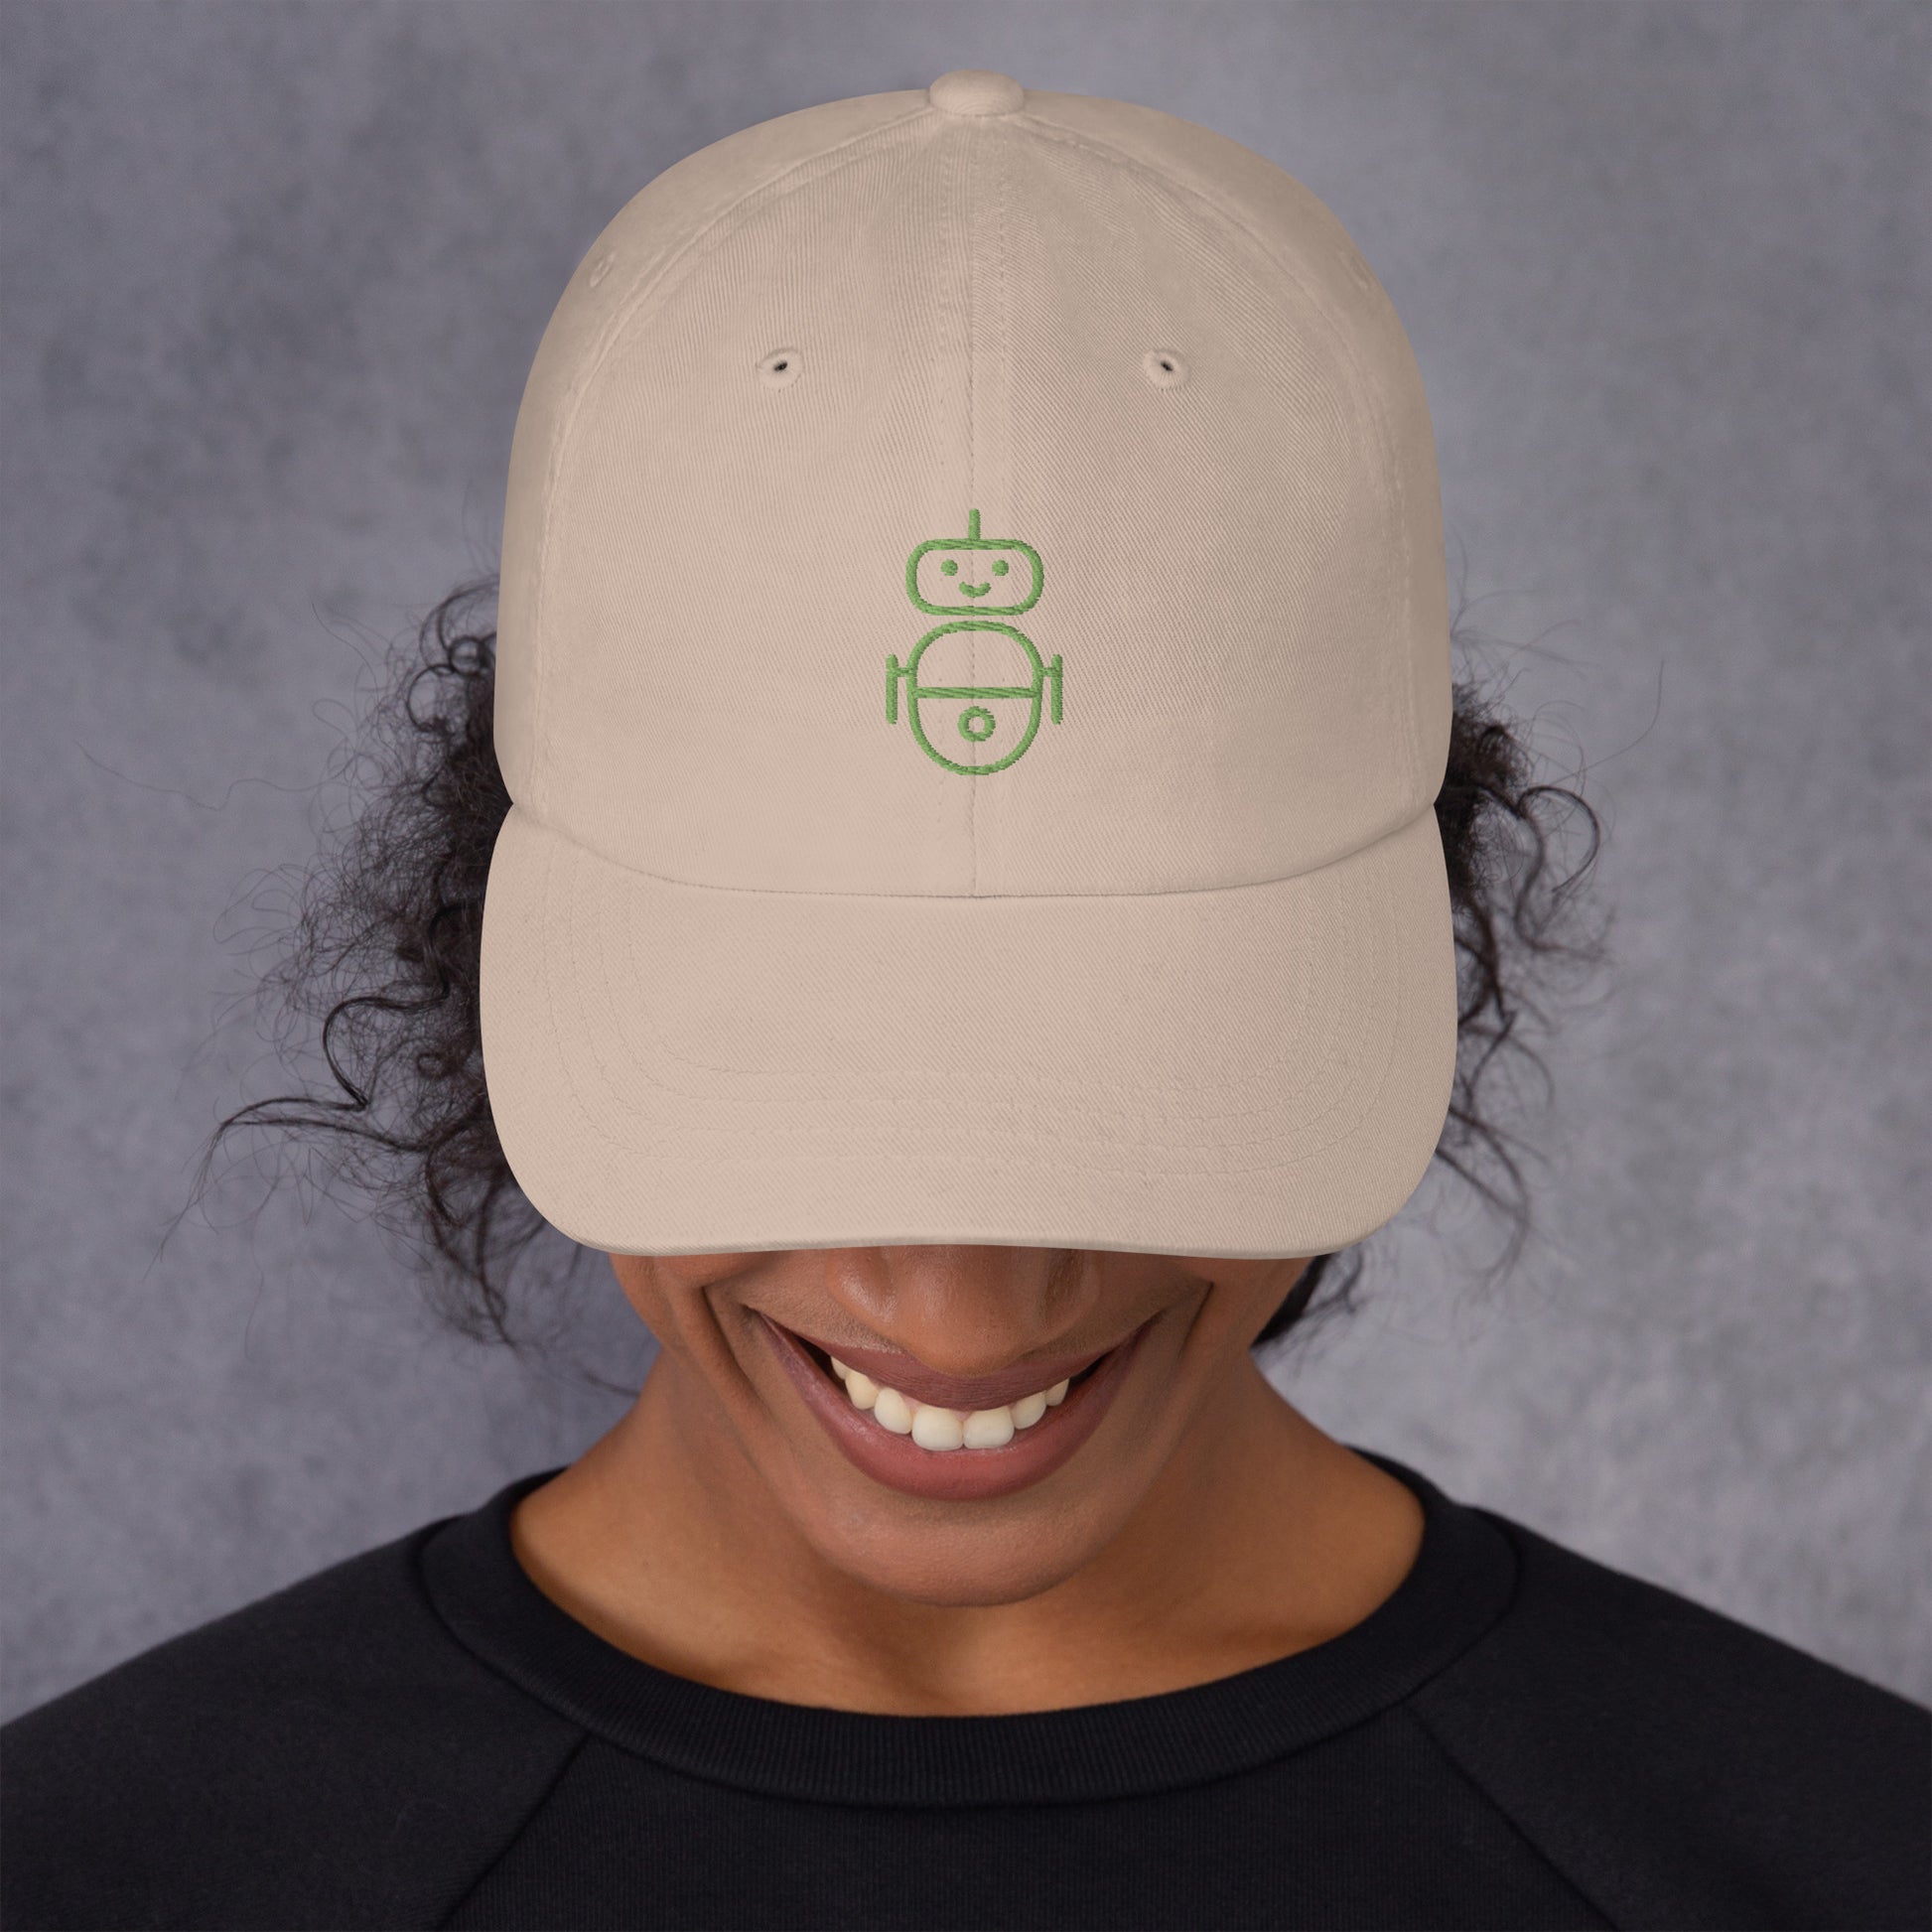 Women with stone hat with in green Android logo